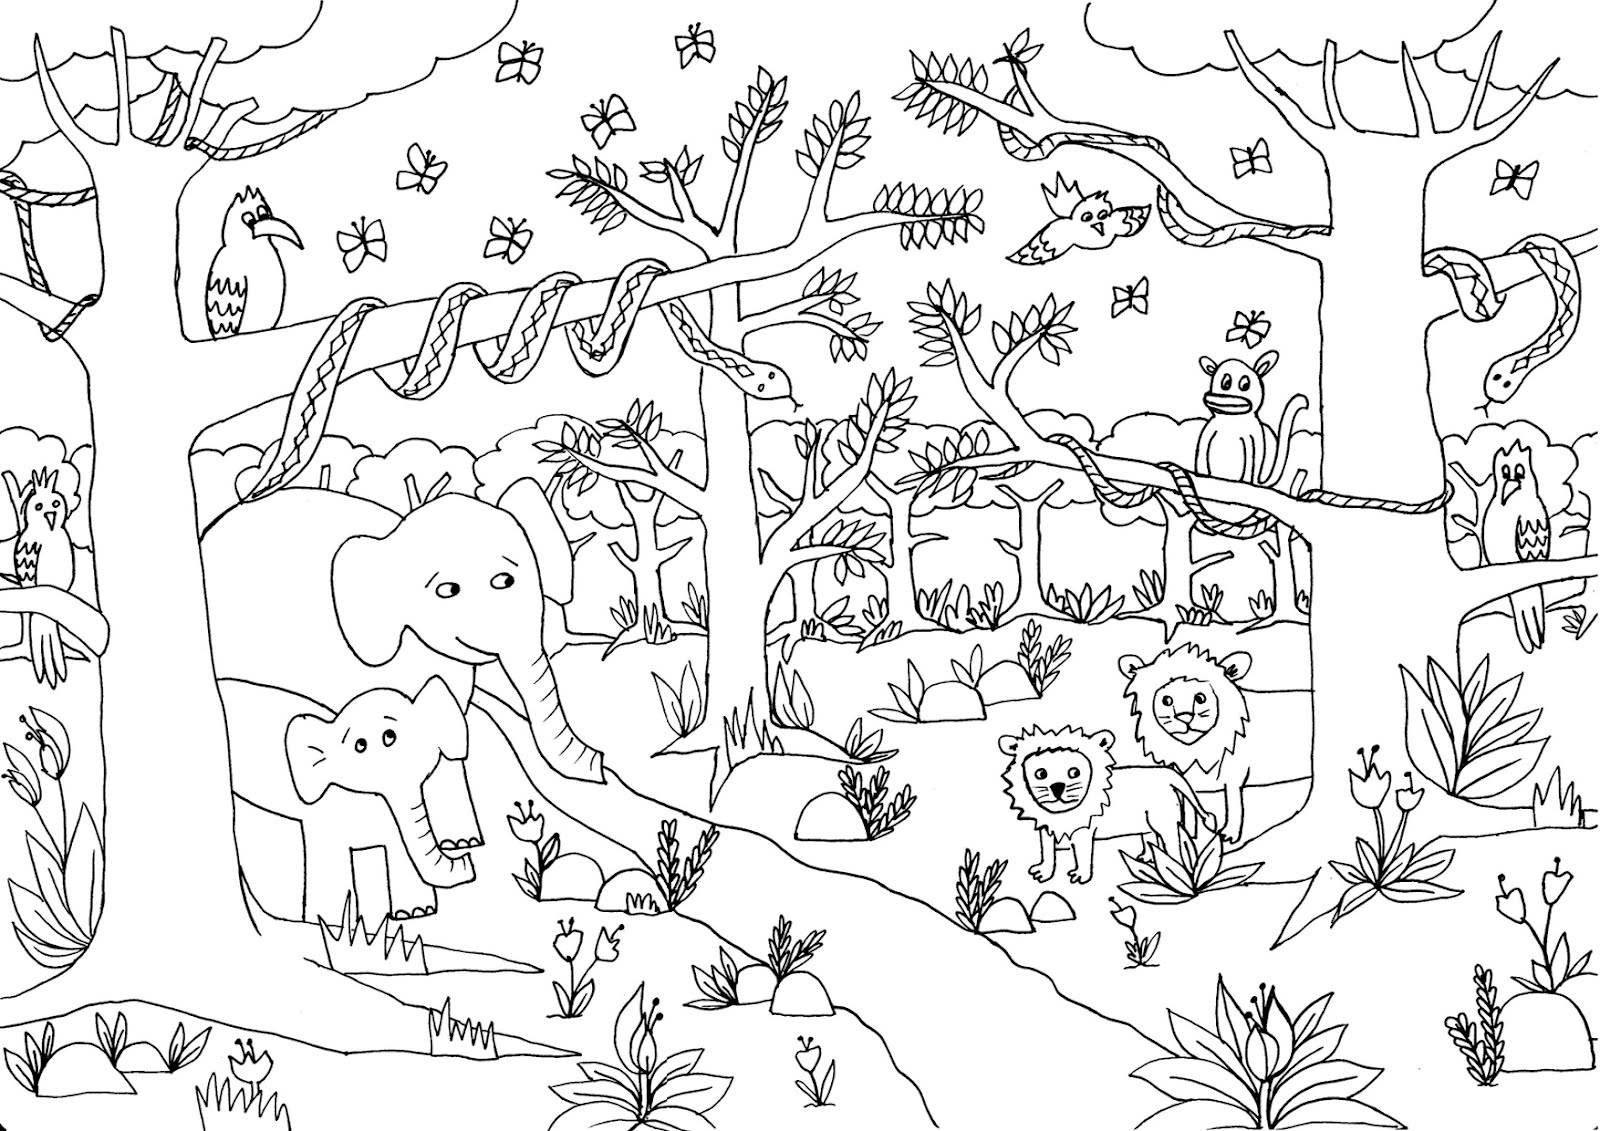 Download Coloring Pages Jungle - 235+ Best Free SVG File for Cricut, Silhouette and Other Machine